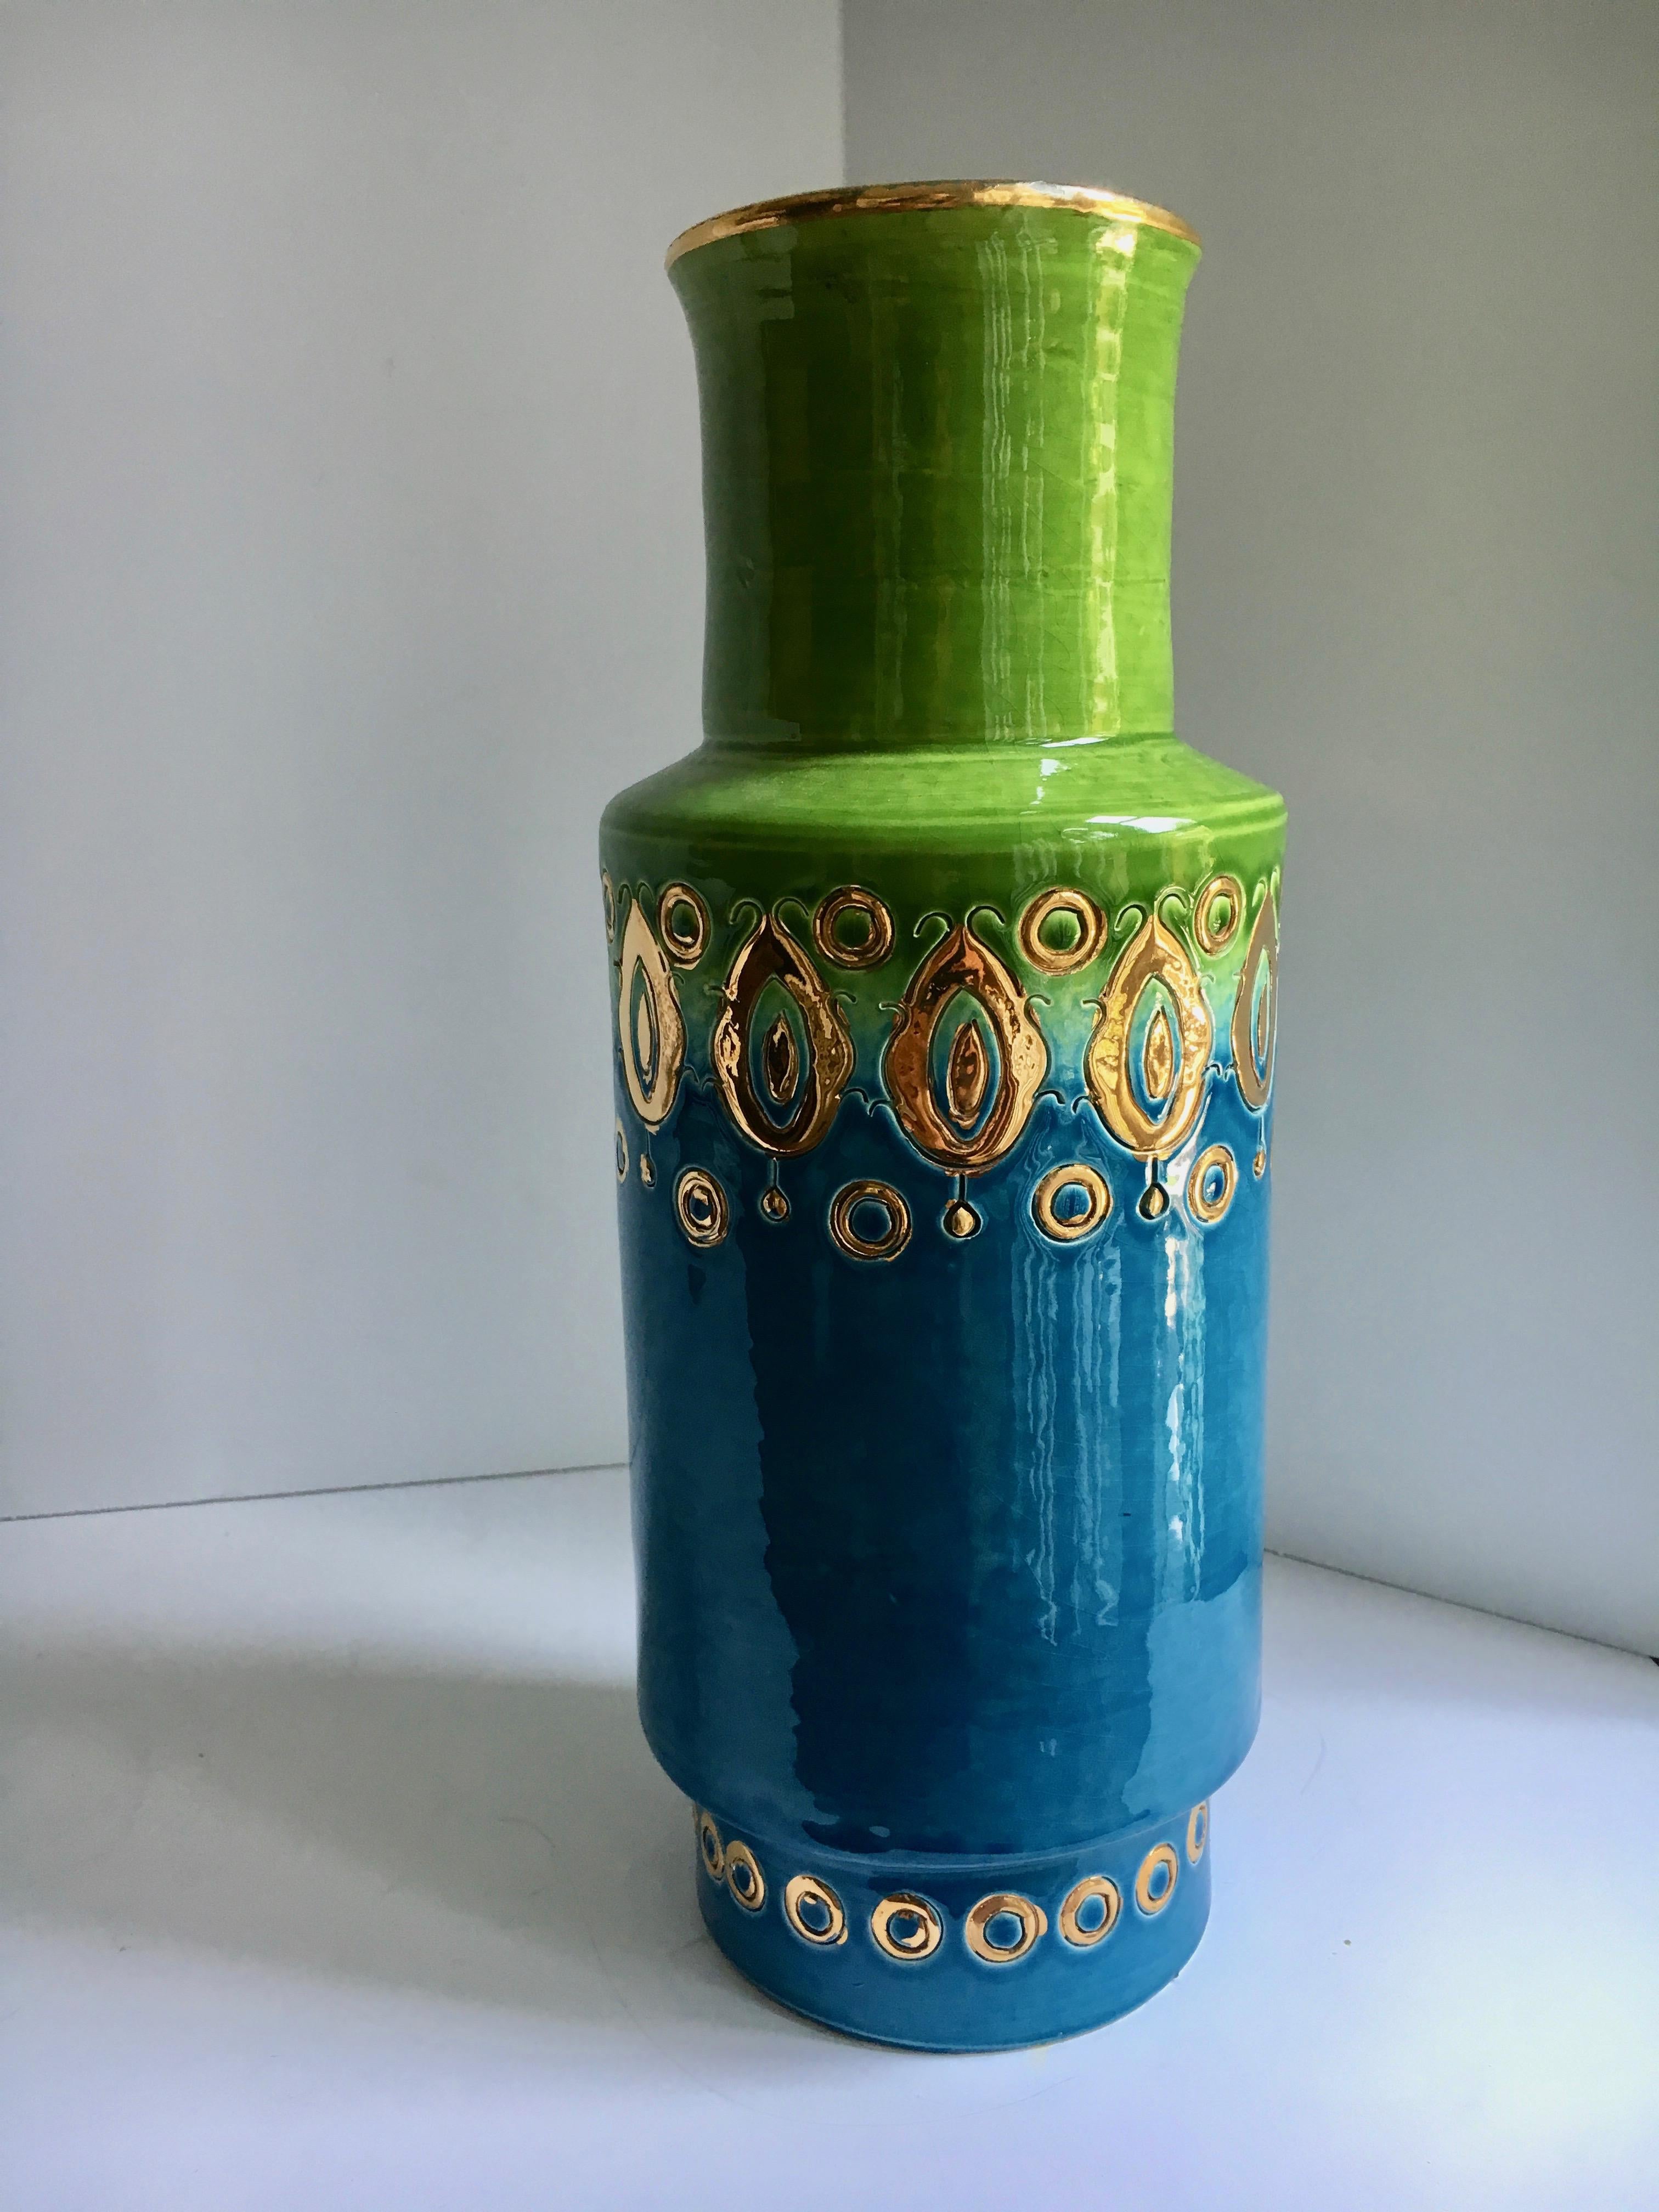 Bitossi Italian green blue cylinder vase - Brilliant color with gold accents - a Classic midcentury ceramic vase - alone a beautiful statement or add flowers to change things up!

Tall and stunning, like a true Italian.